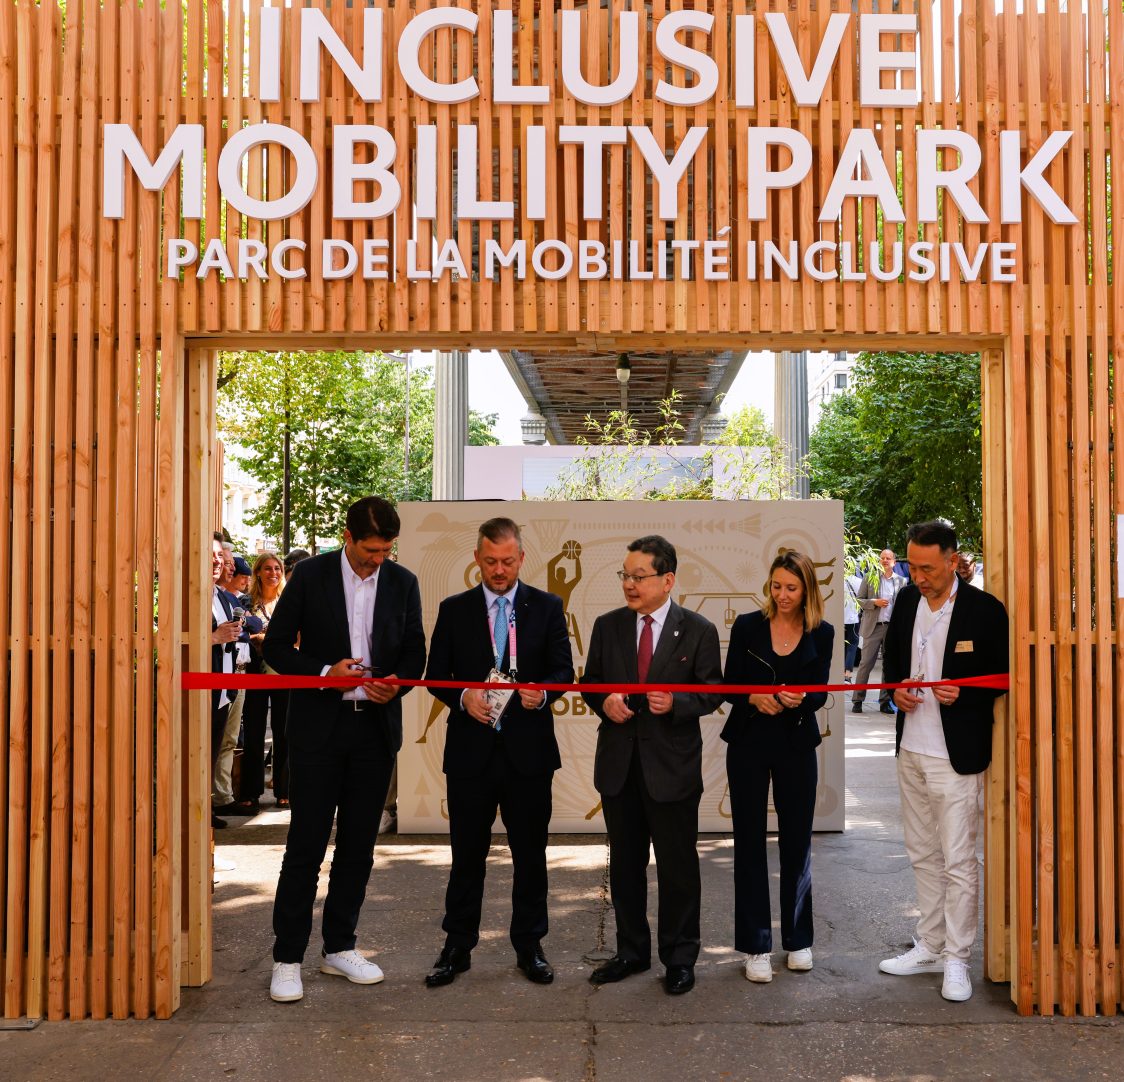 Toyota Inclusive Mobility Park Opening. From left: Pierre Rabadan, Deputy Mayor of Paris in charge of the Olympic and Paralympic Games, Sport and the Seine, Andrew Parsons, President of the International Paralympic Committee, Makita Shimokawa, Japanese Ambassador to France, Marie-Amélie Le Fur, President of the French Paralympic and Sports Committee, Yoshihiro Nakata, President and CEO of Toyota Motor Europe